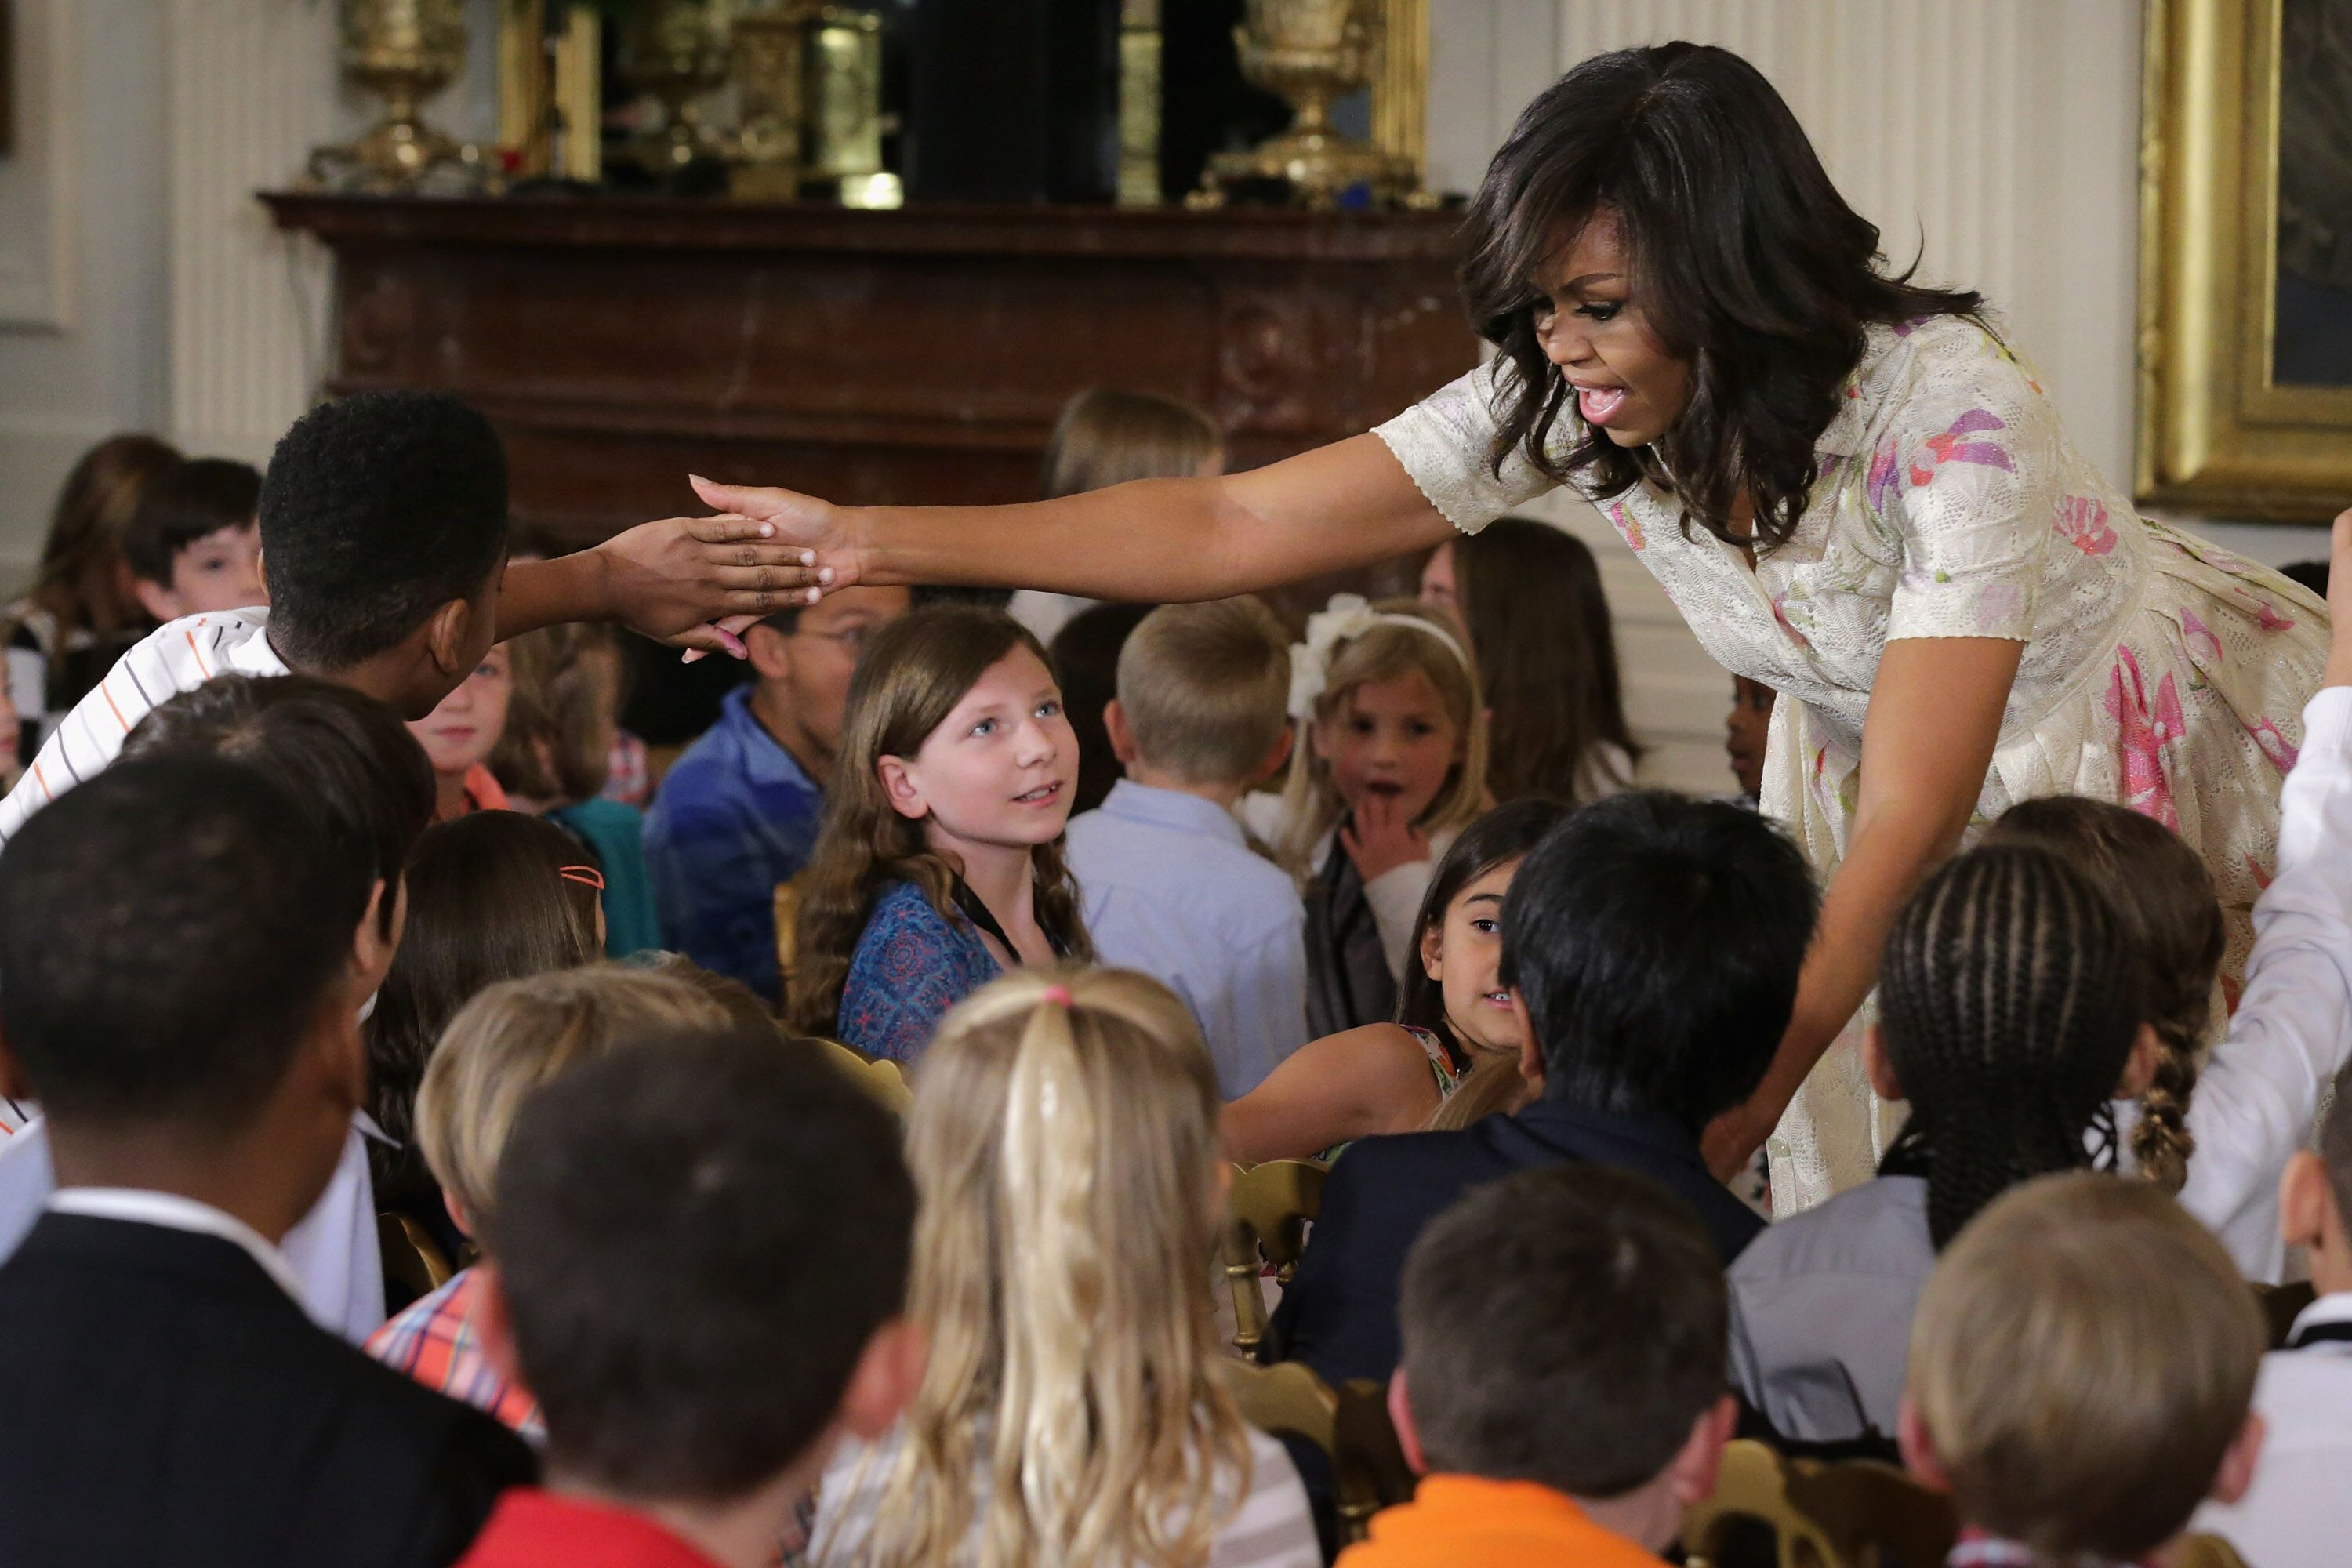 Michelle Obama gives hugs and high-fives to children for Take Our Daughters and Sons to Work Day in the East Room of the White House April 20, 2016 in Washington, DC. | Photo: Getty Images